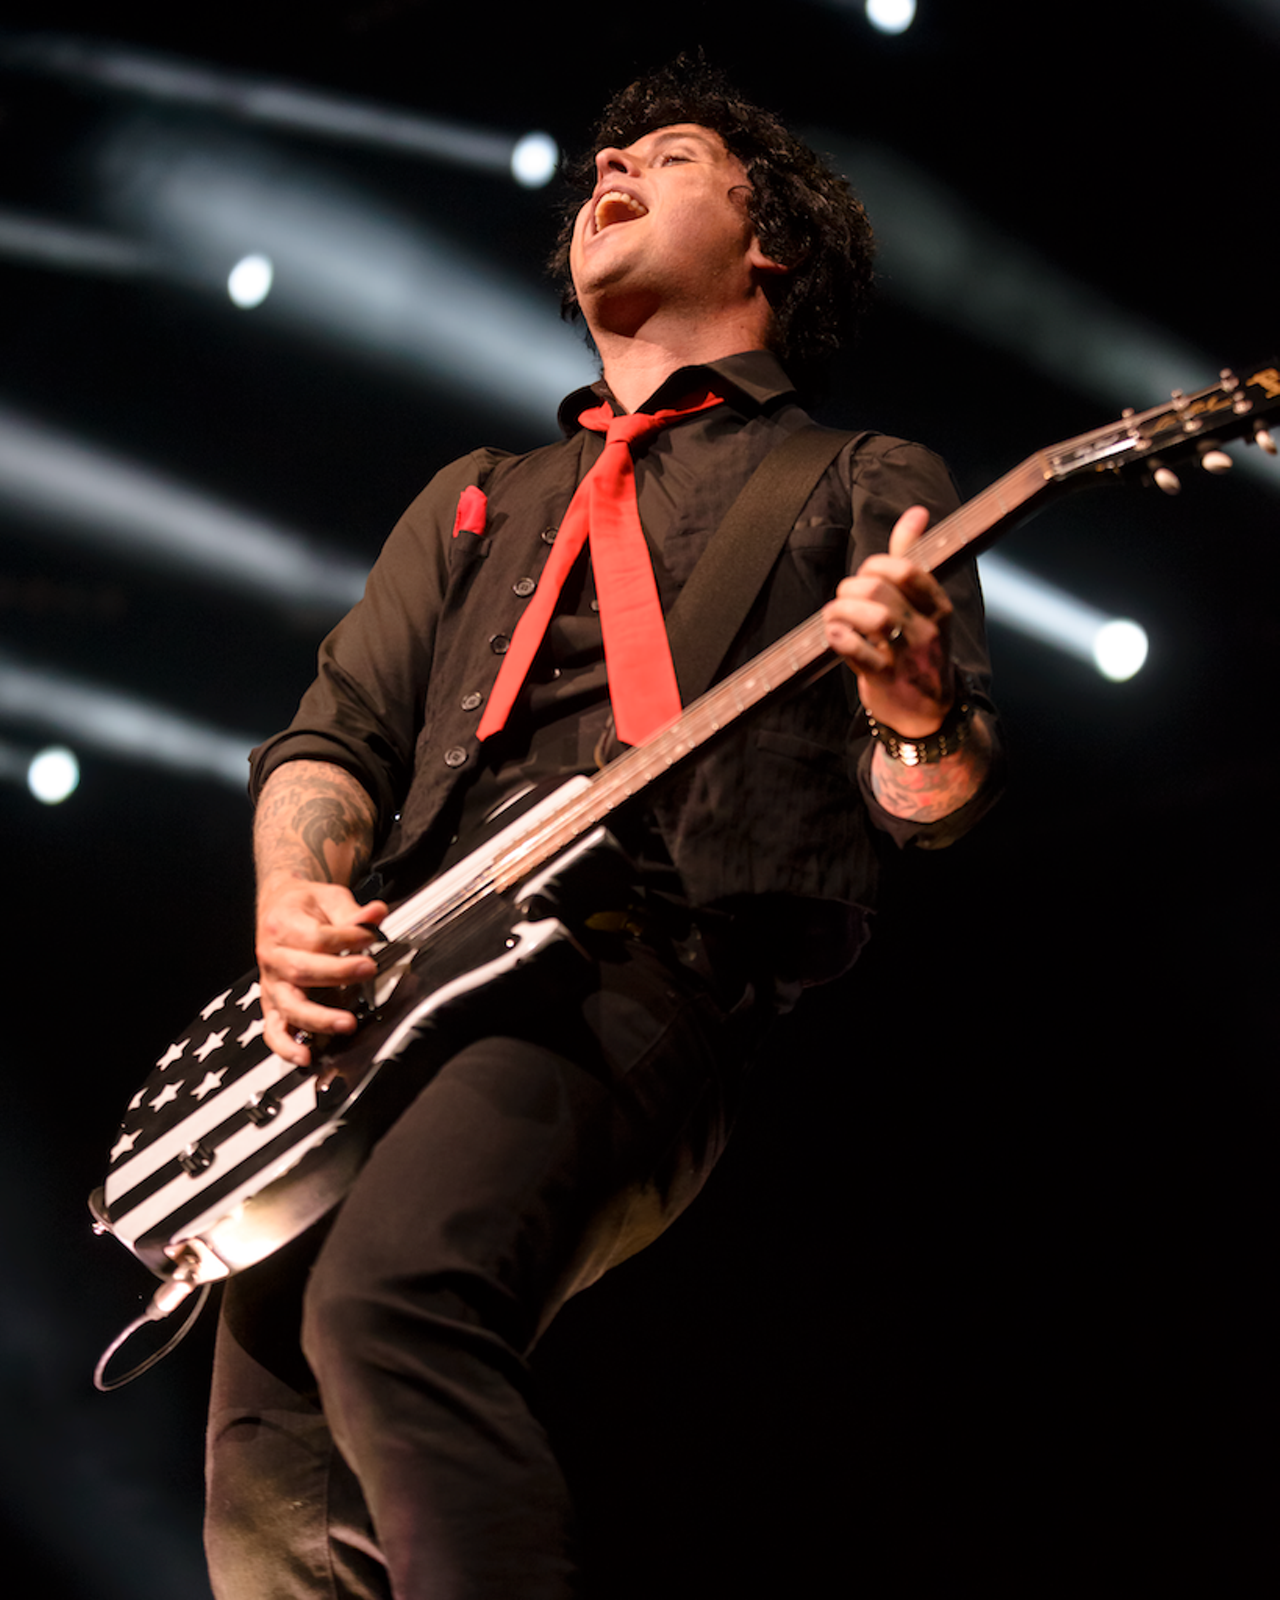 Green Day plays MidFlorida Credit Union Amphitheatre in Tampa, Florida on September 5, 2017.